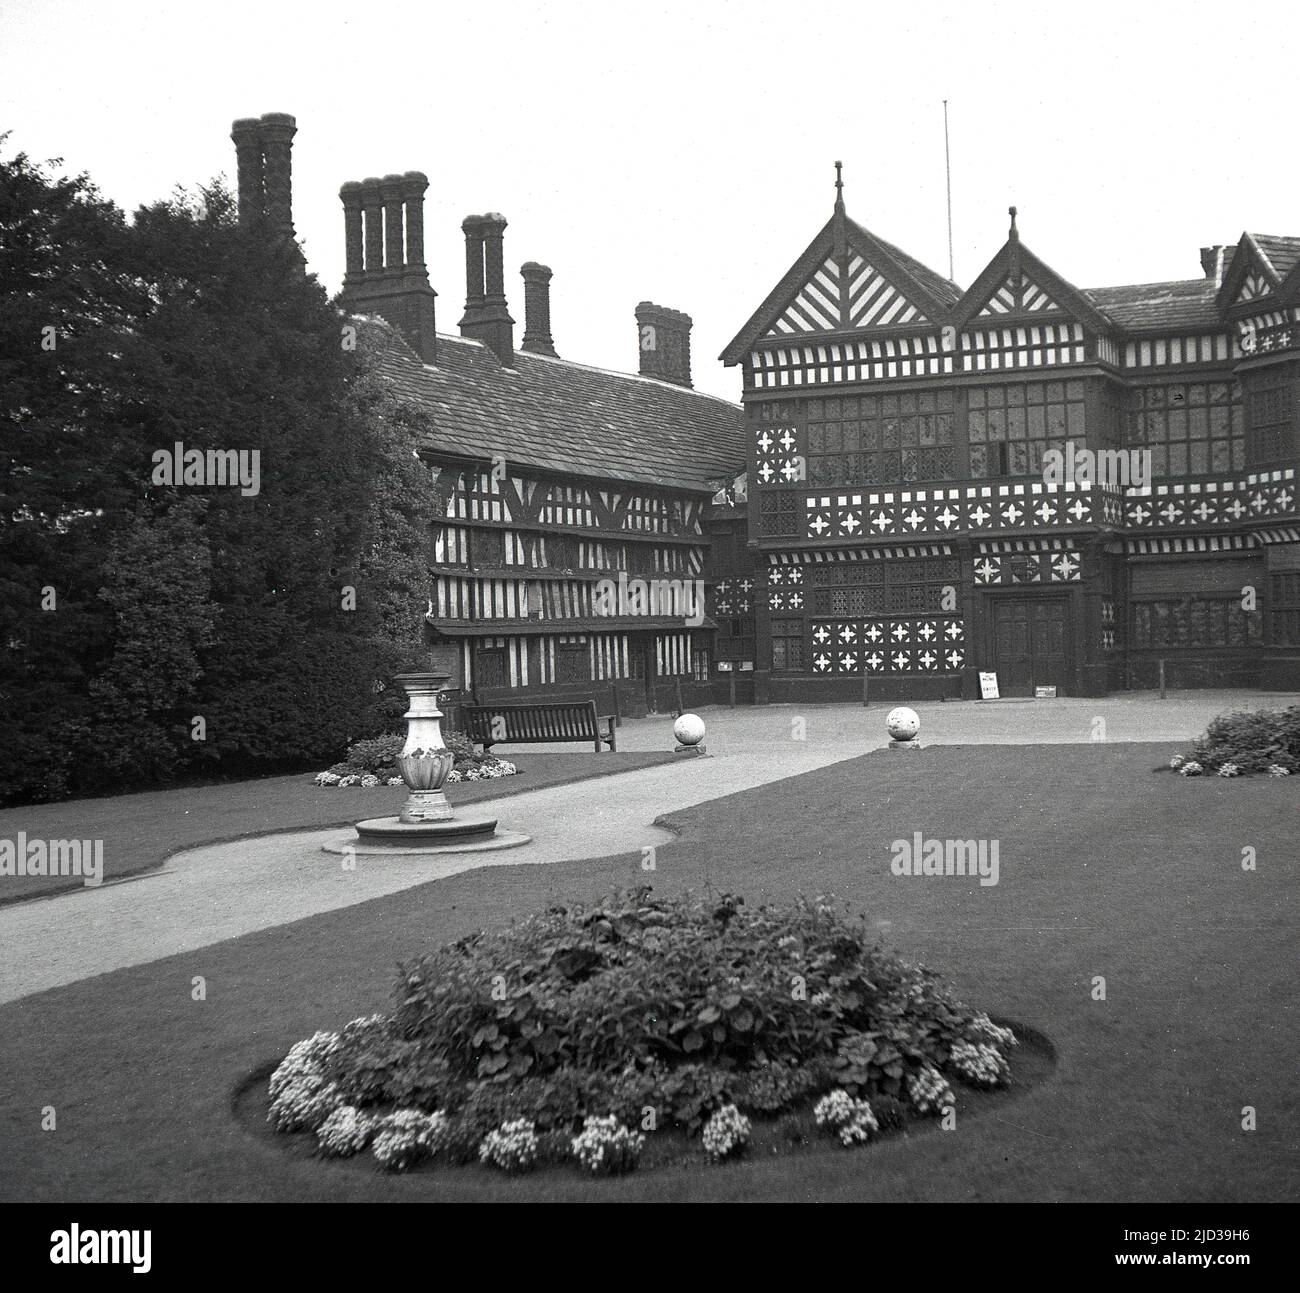 1940s, historical, the rear of Bramall Hall, Stockport, England, UK. A timber-framed Tudor manor house that dates back to the 14th century, with later additions, the house and surrounding parkland was acquired by the local authority in 1935 and became a museum. The Davenport family, which it is believed built the house, held the manor for over 500 years. Here we see a view from the 1940s from the west, of the main entrance, courtyard, south wing and the Great Hall in the centre. Stock Photo